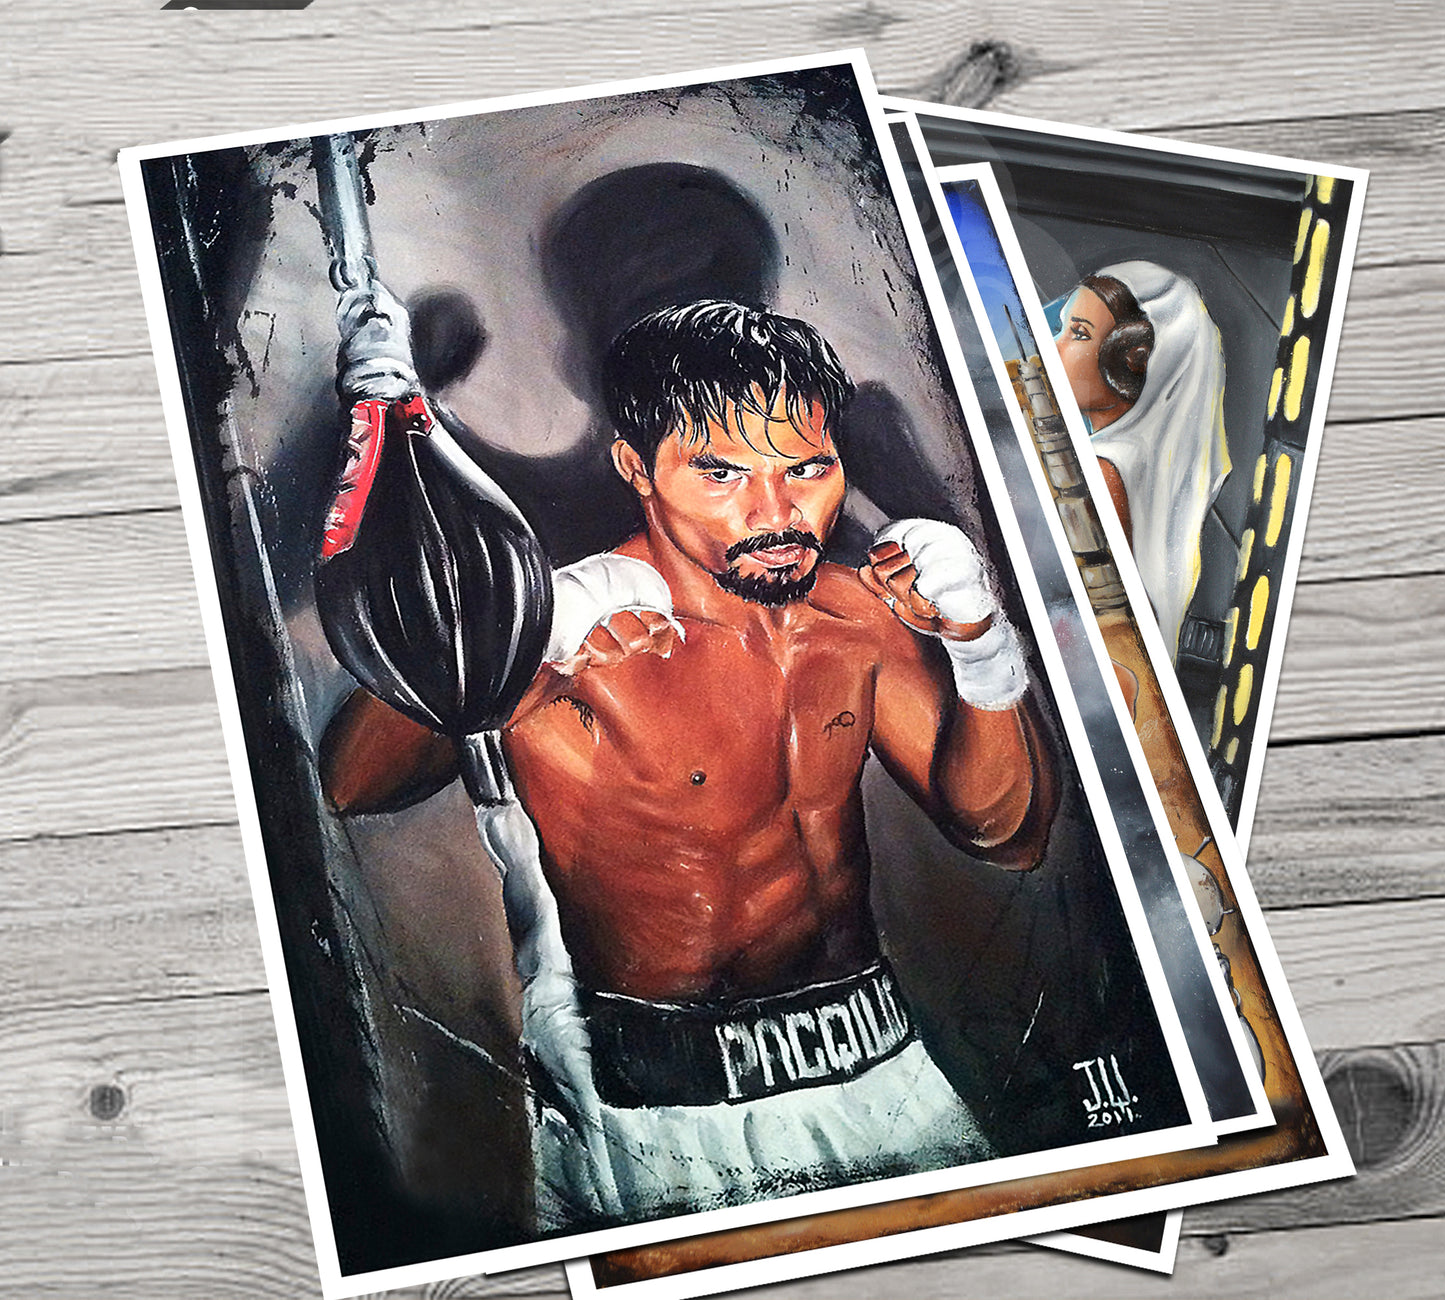 JEREMY WORST Manny Pacquiao Boxing Canvas Prints Artwork  anime art painting original win welterweight champion Philip pines fighting pride